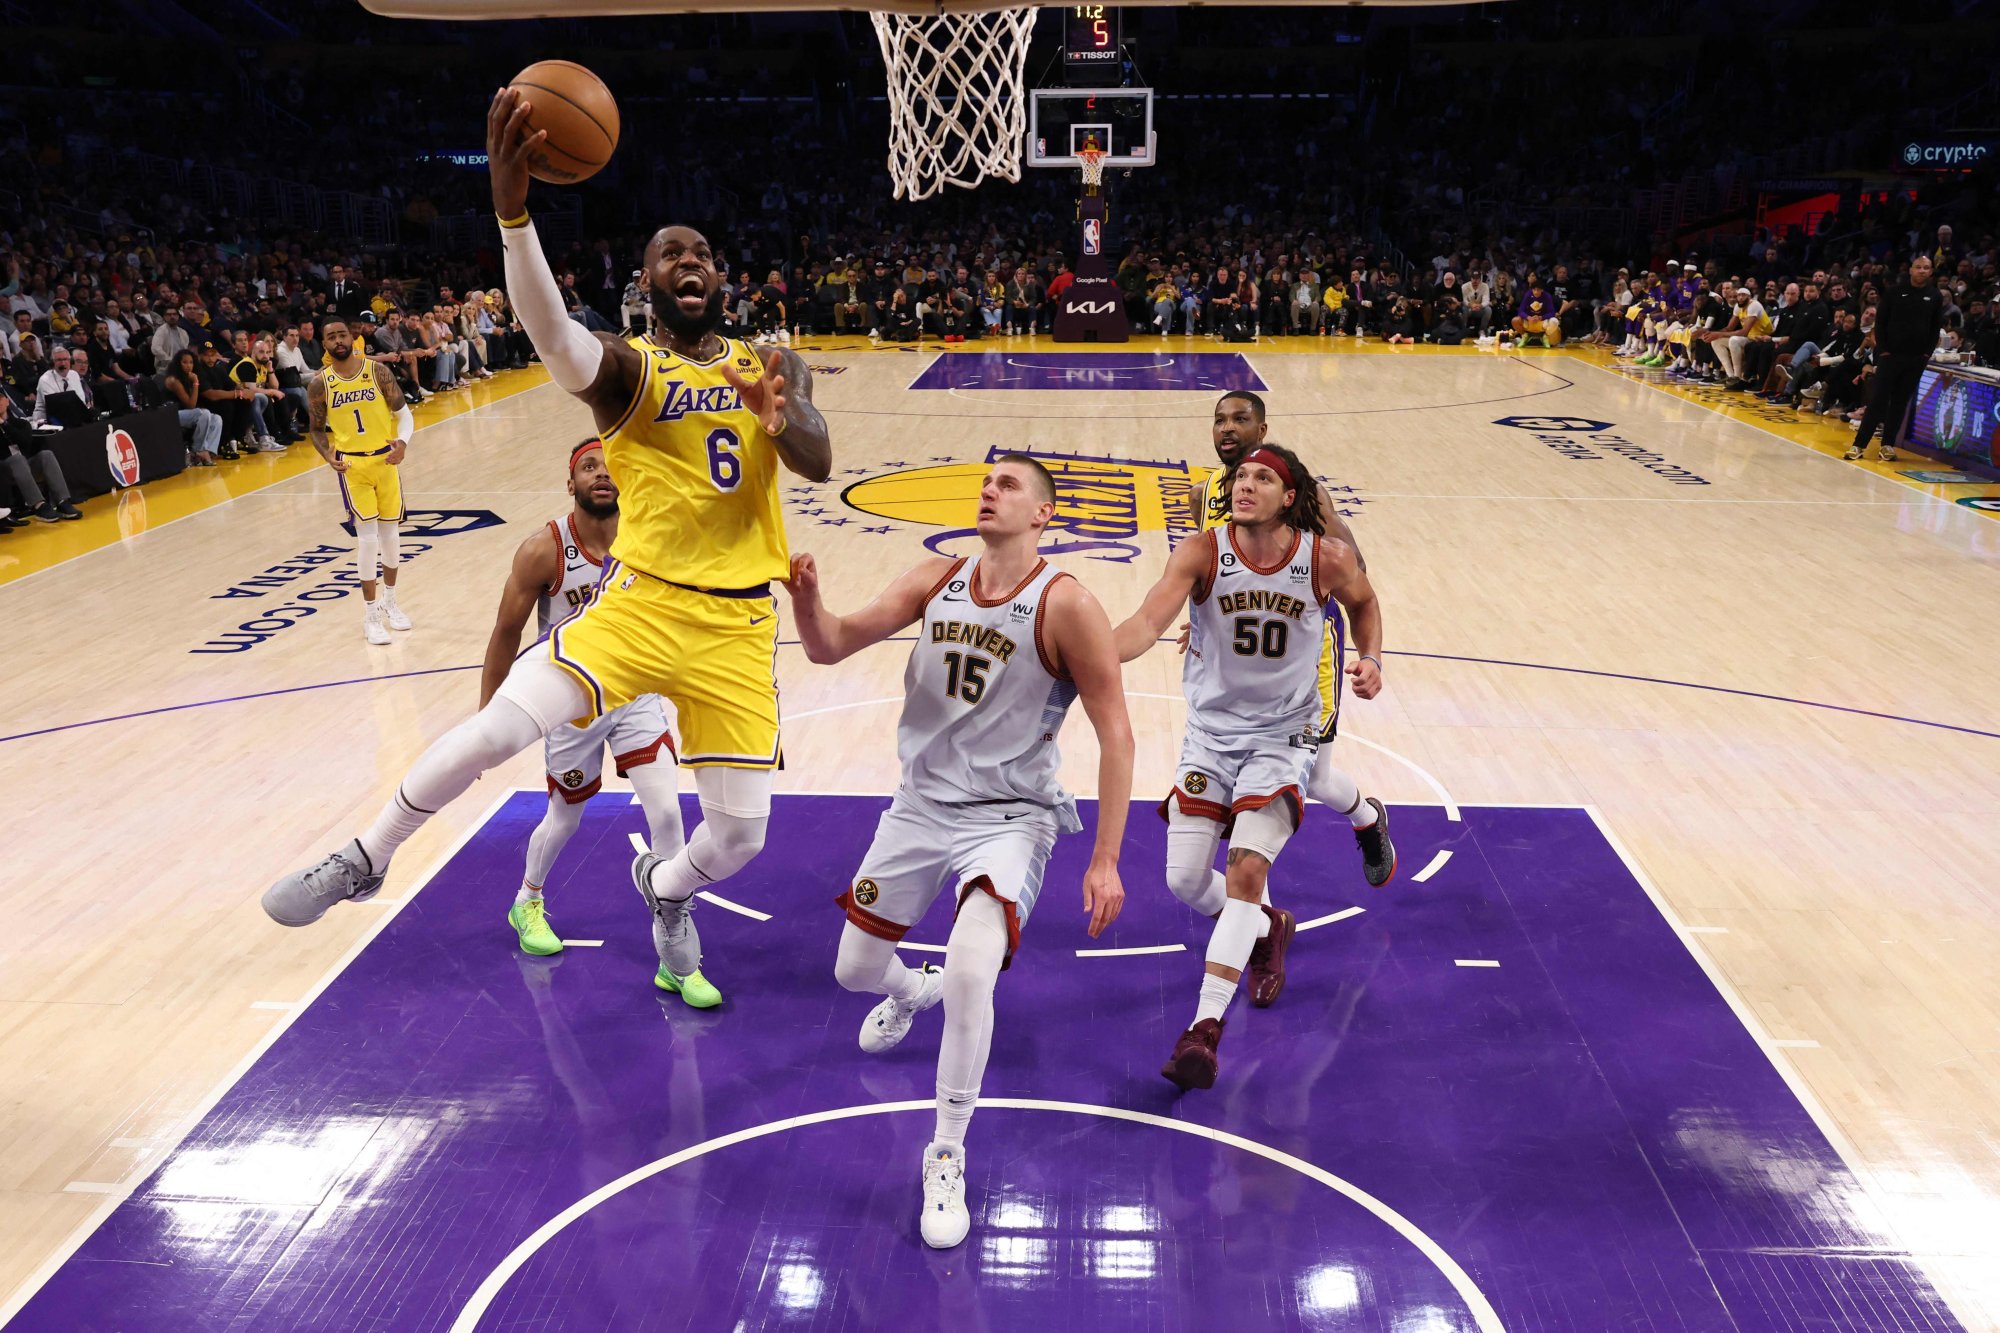 LeBron James returns to Lakers rejuvenated by sons, new teammates